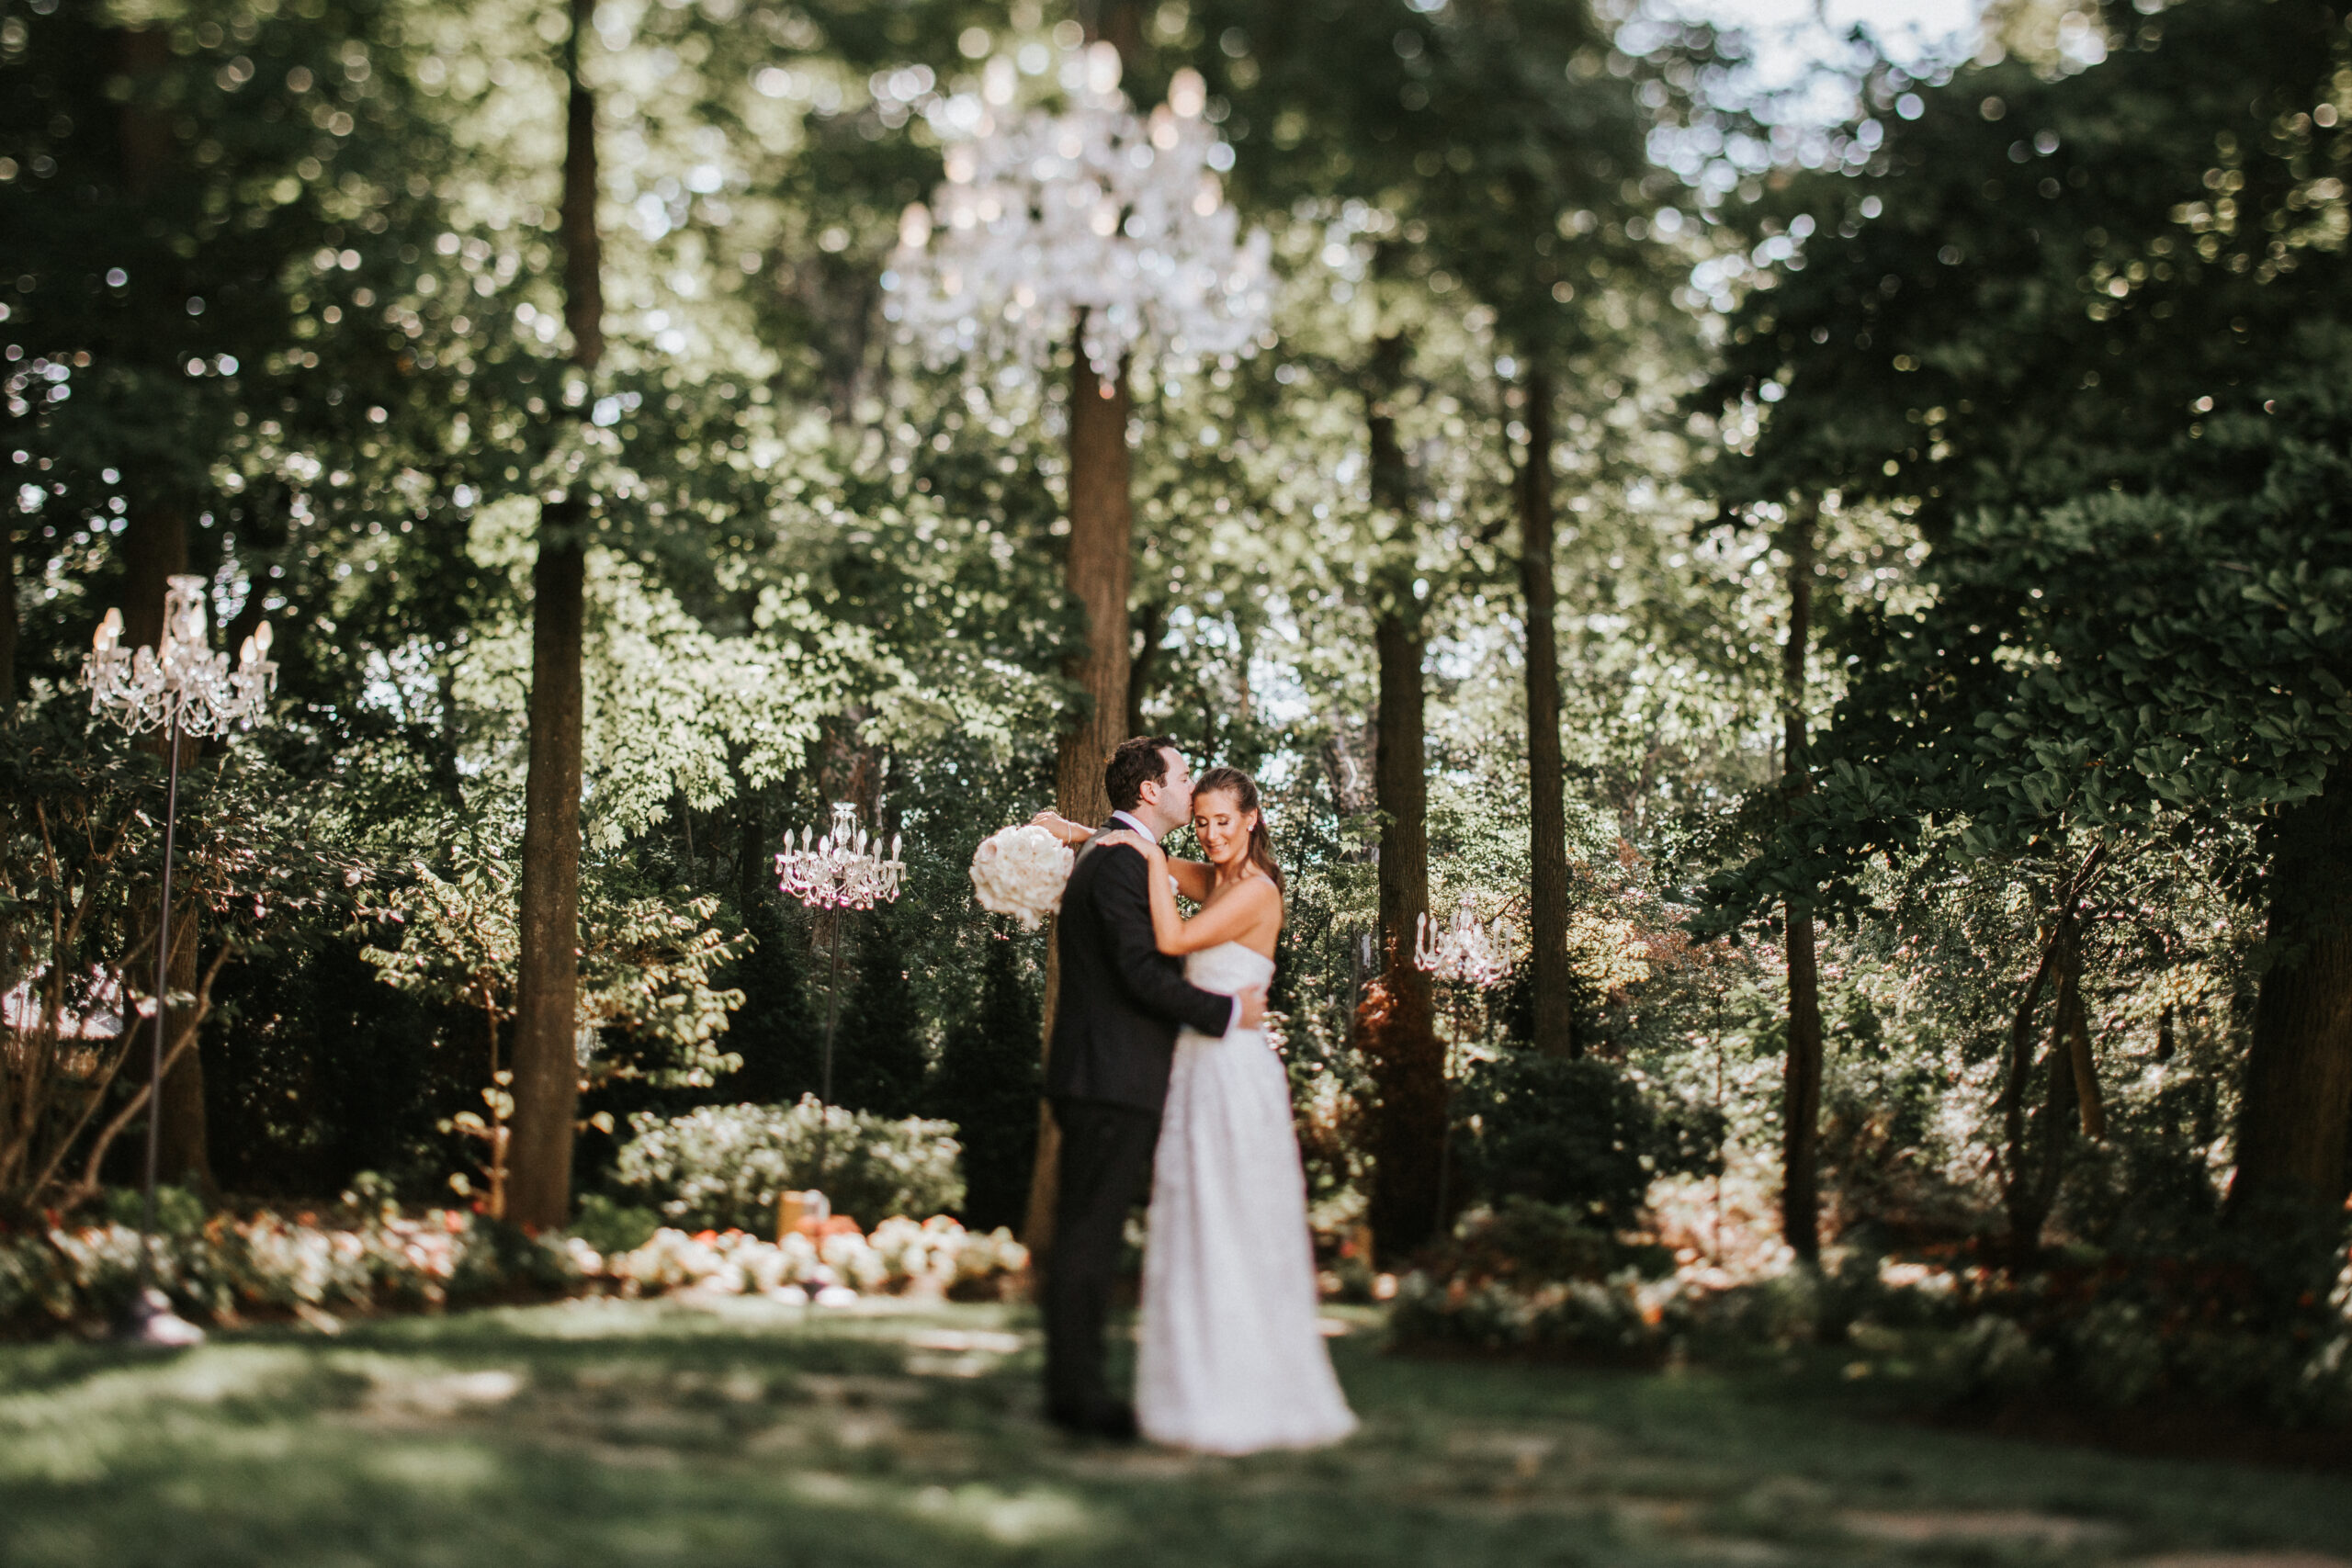 Groom kisses bride in Crystal Plaza's well-manicured gardens, filled with lush greenery, trees, and flowers.